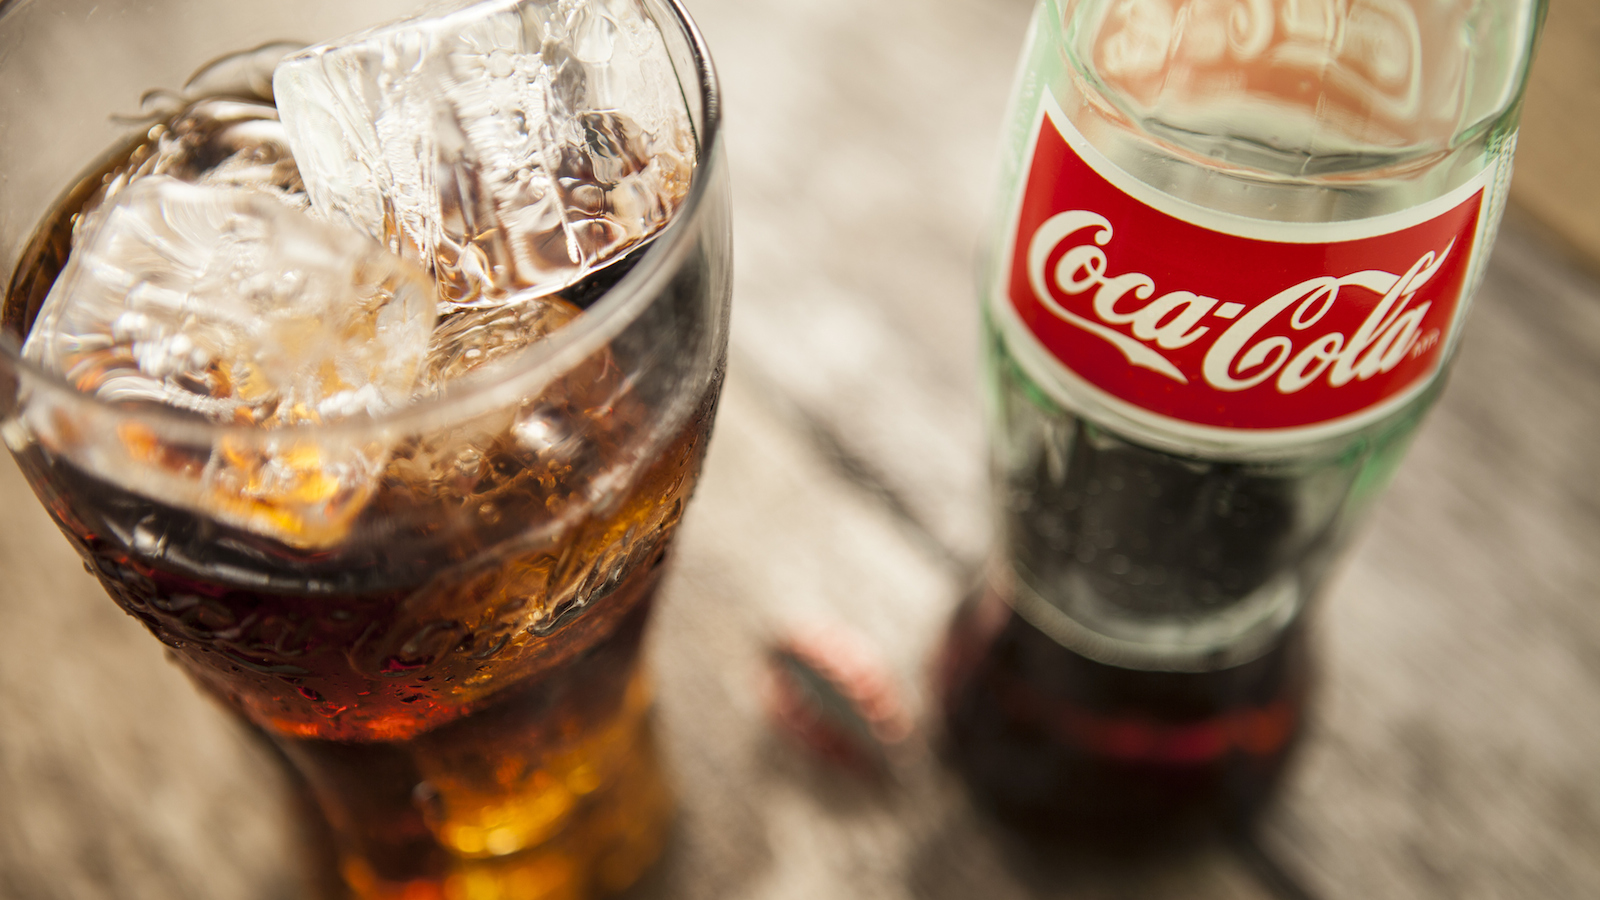 Passing This General Knowledge Quiz Means You Know a Lot About Everything Coke Bottle And Glass